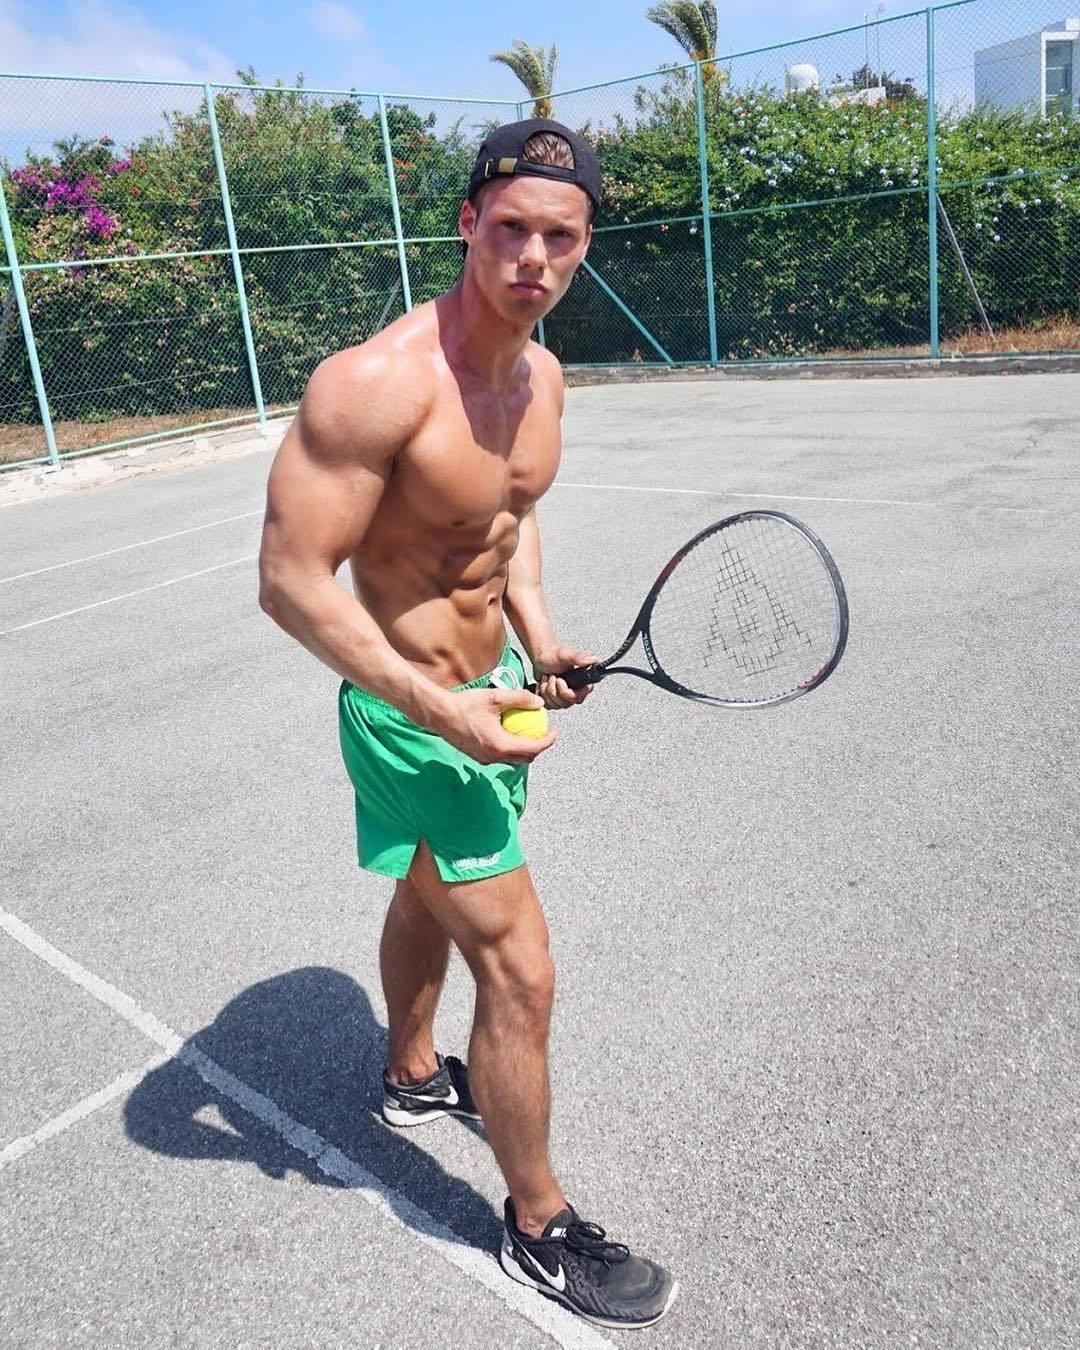 cute-young-fit-shirtless-tennis-player-fit-body-boy